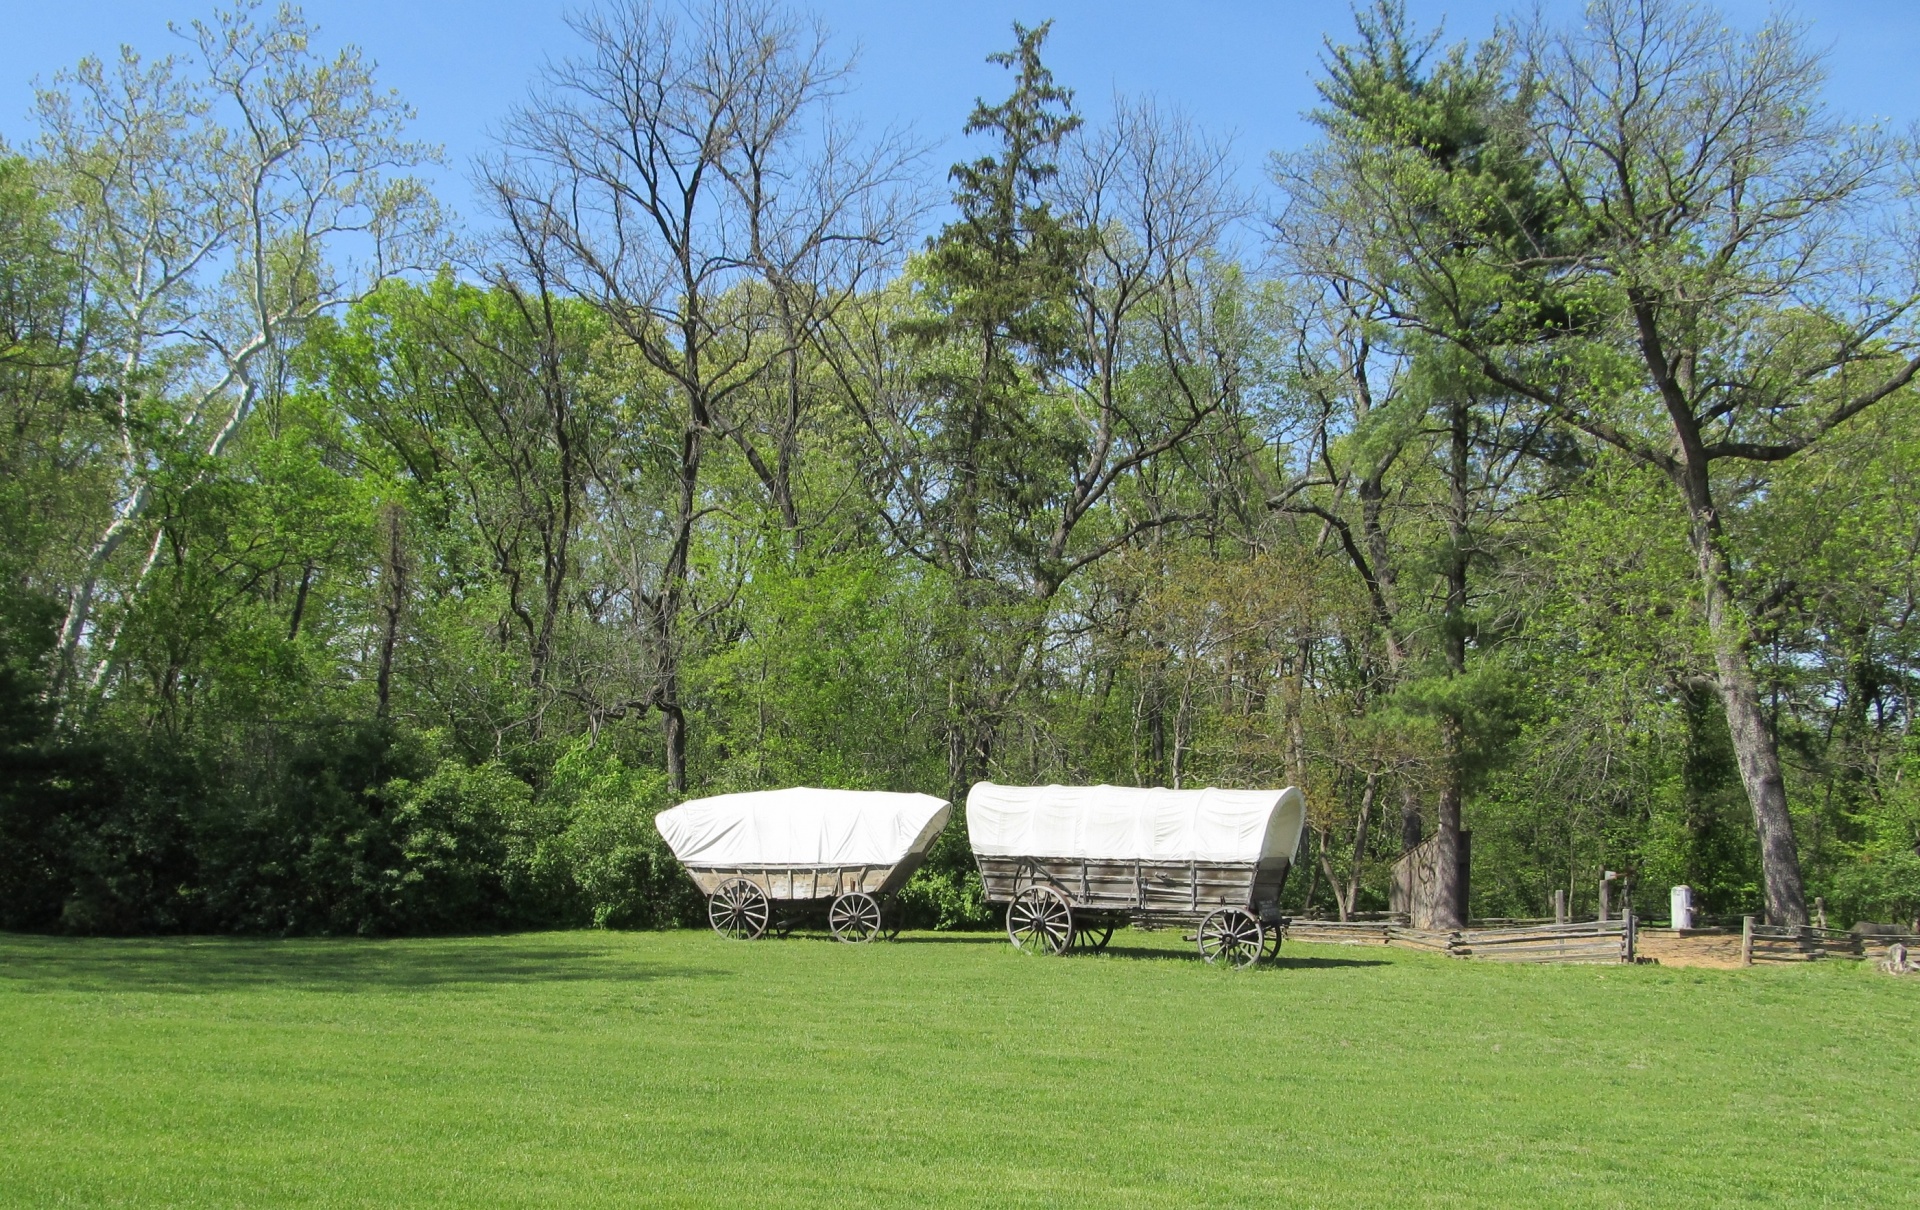 Historical Old Covered Wagons